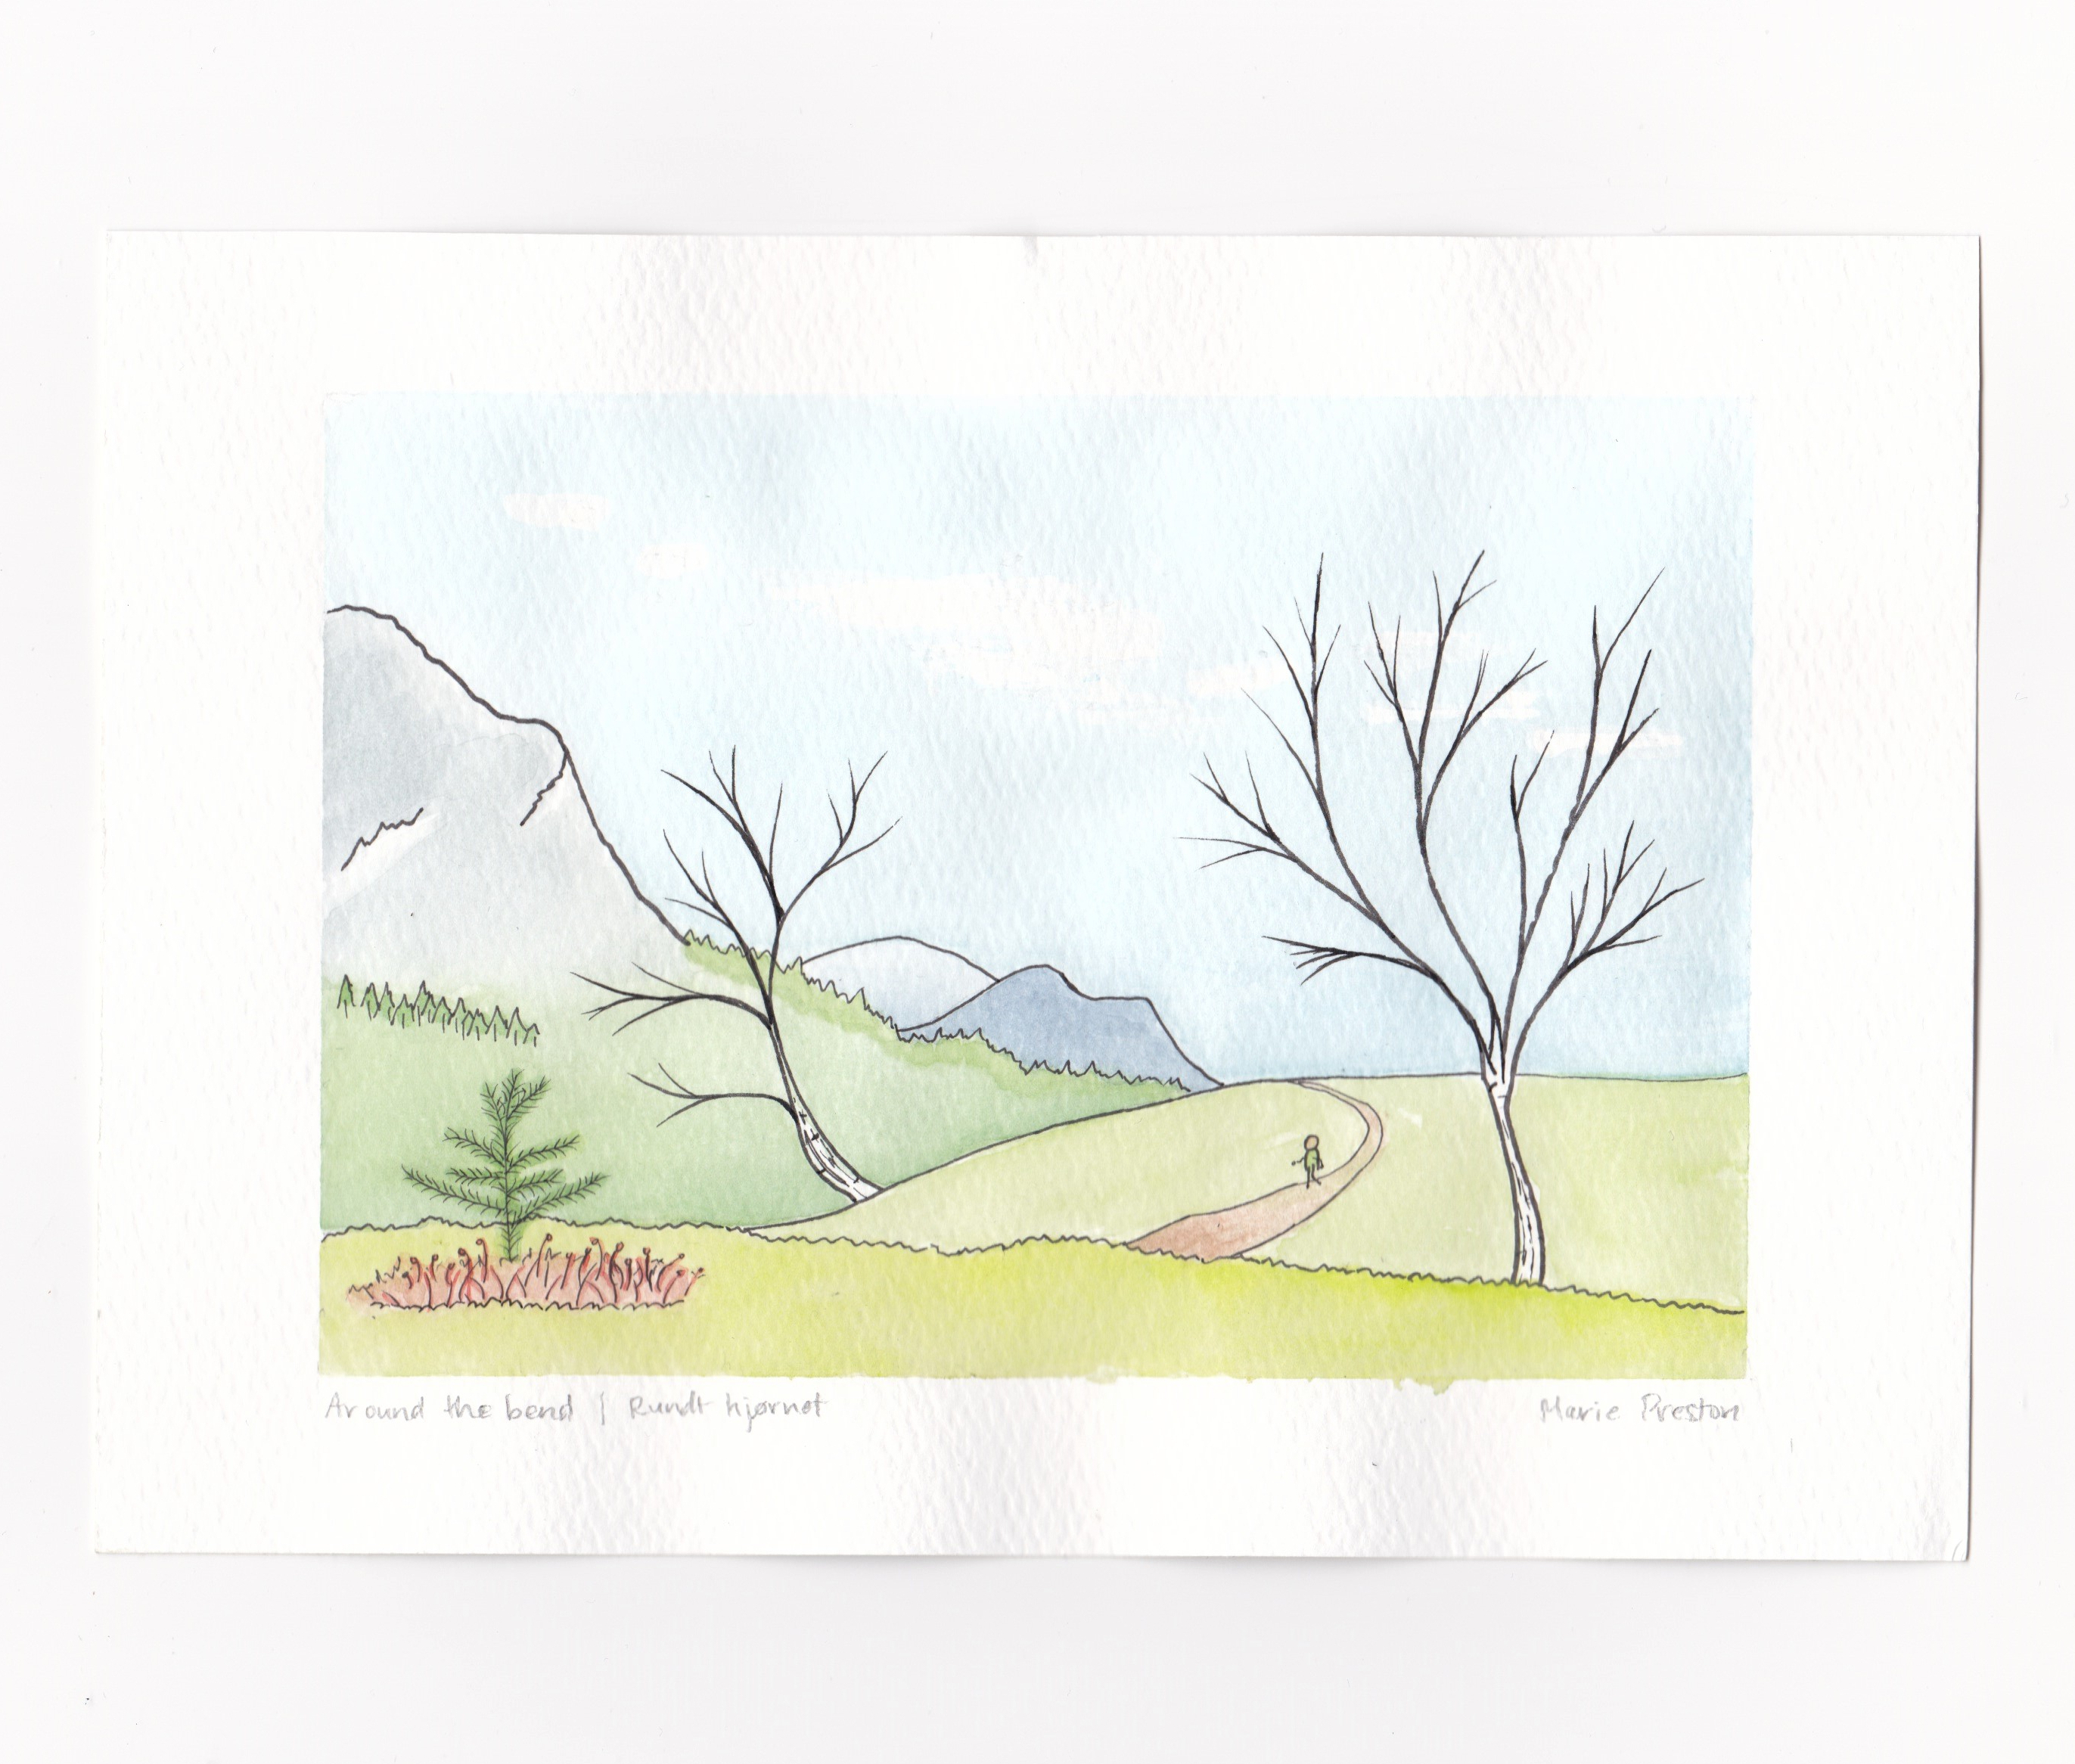 Watercolour painting: Small green fir sapling with red shrub, leafless birch trees, person on path toward blue and grey mountains. Title: Around the Bend by Marie Preston